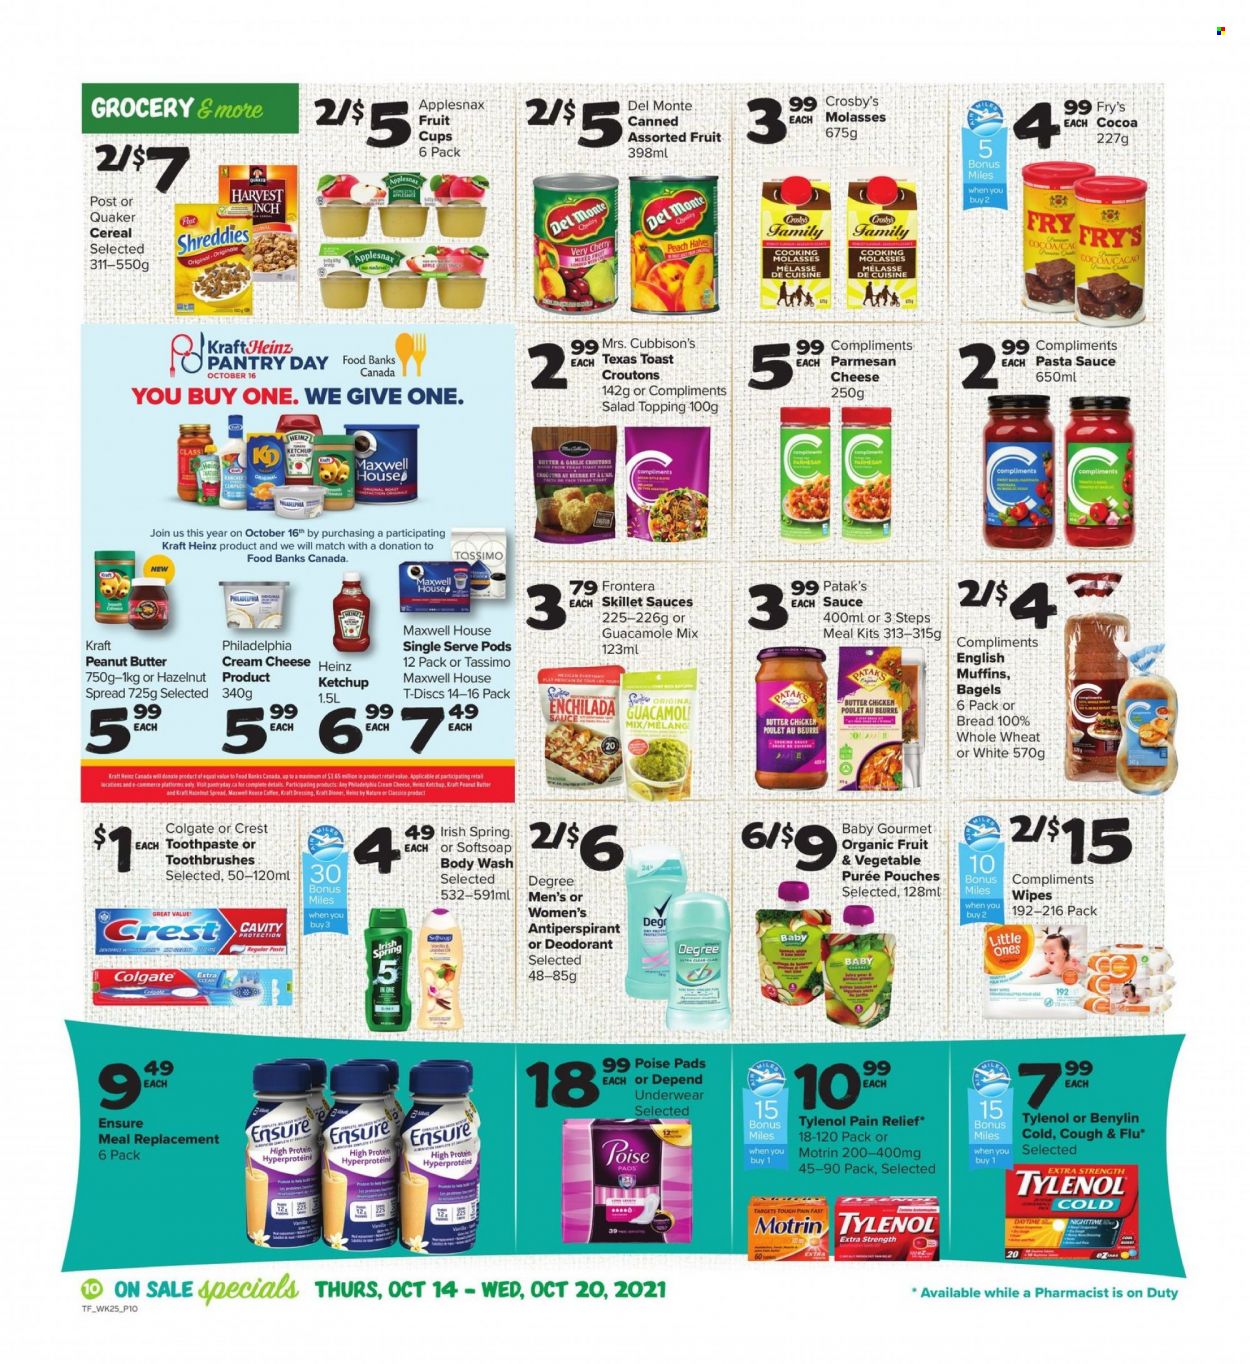 thumbnail - Thrifty Foods Flyer - October 14, 2021 - October 20, 2021 - Sales products - bagels, bread, english muffins, fruit cup, enchiladas, pasta sauce, Quaker, Kraft®, guacamole, parmesan, cocoa, croutons, topping, Heinz, cereals, dressing, Classico, molasses, peanut butter, hazelnut spread, Maxwell House, tea, coffee, baby food pouch, wipes, body wash, Softsoap, toothpaste, Crest, anti-perspirant, pain relief, Tylenol, Benylin, Motrin, Colgate, ketchup, Philadelphia, deodorant. Page 10.